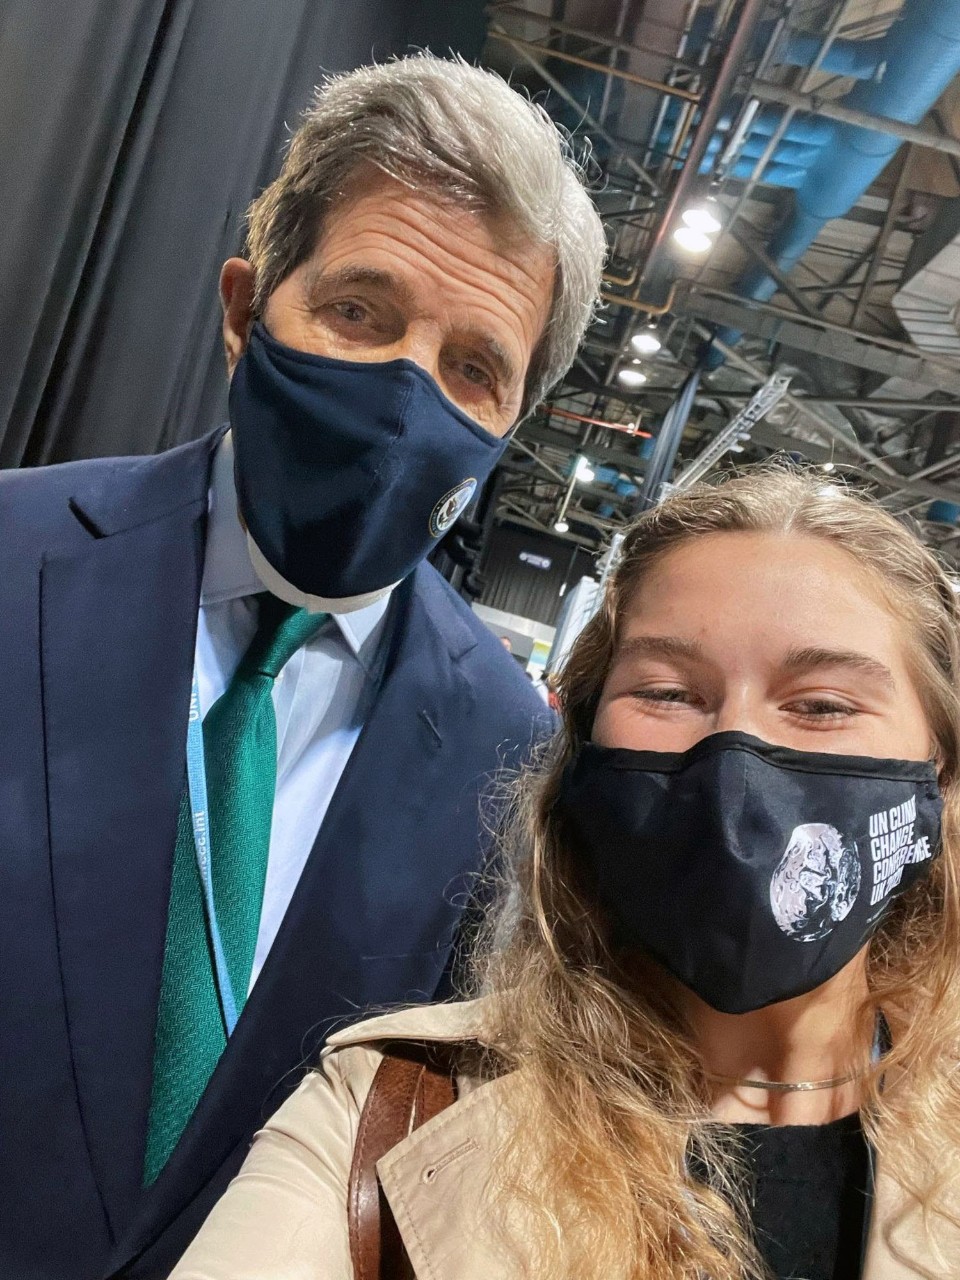 Julia Horchos '23—above left with U.S. Special Presidential Envoy for Climate John Kerry J.D. '76, H'14